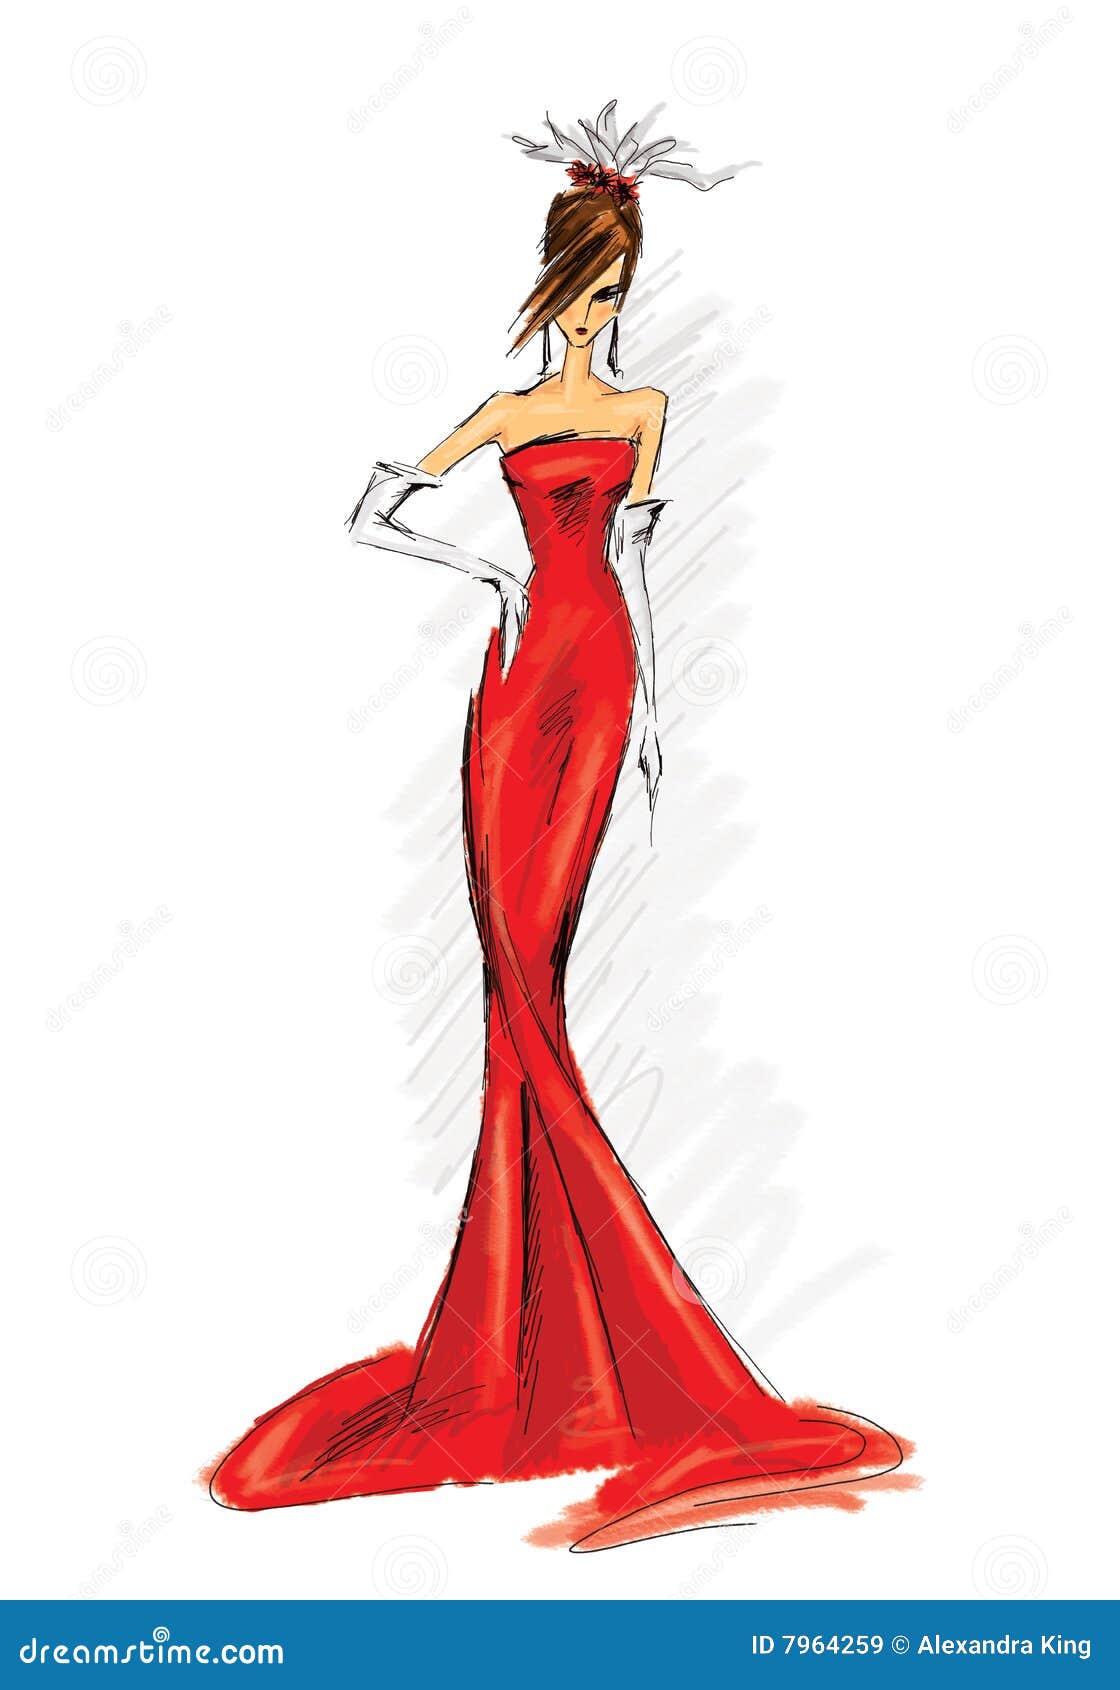 Drawing Red Illustrations – 13,028 Drawing Dress Stock Illustrations, Vectors & Clipart - Dreamstime